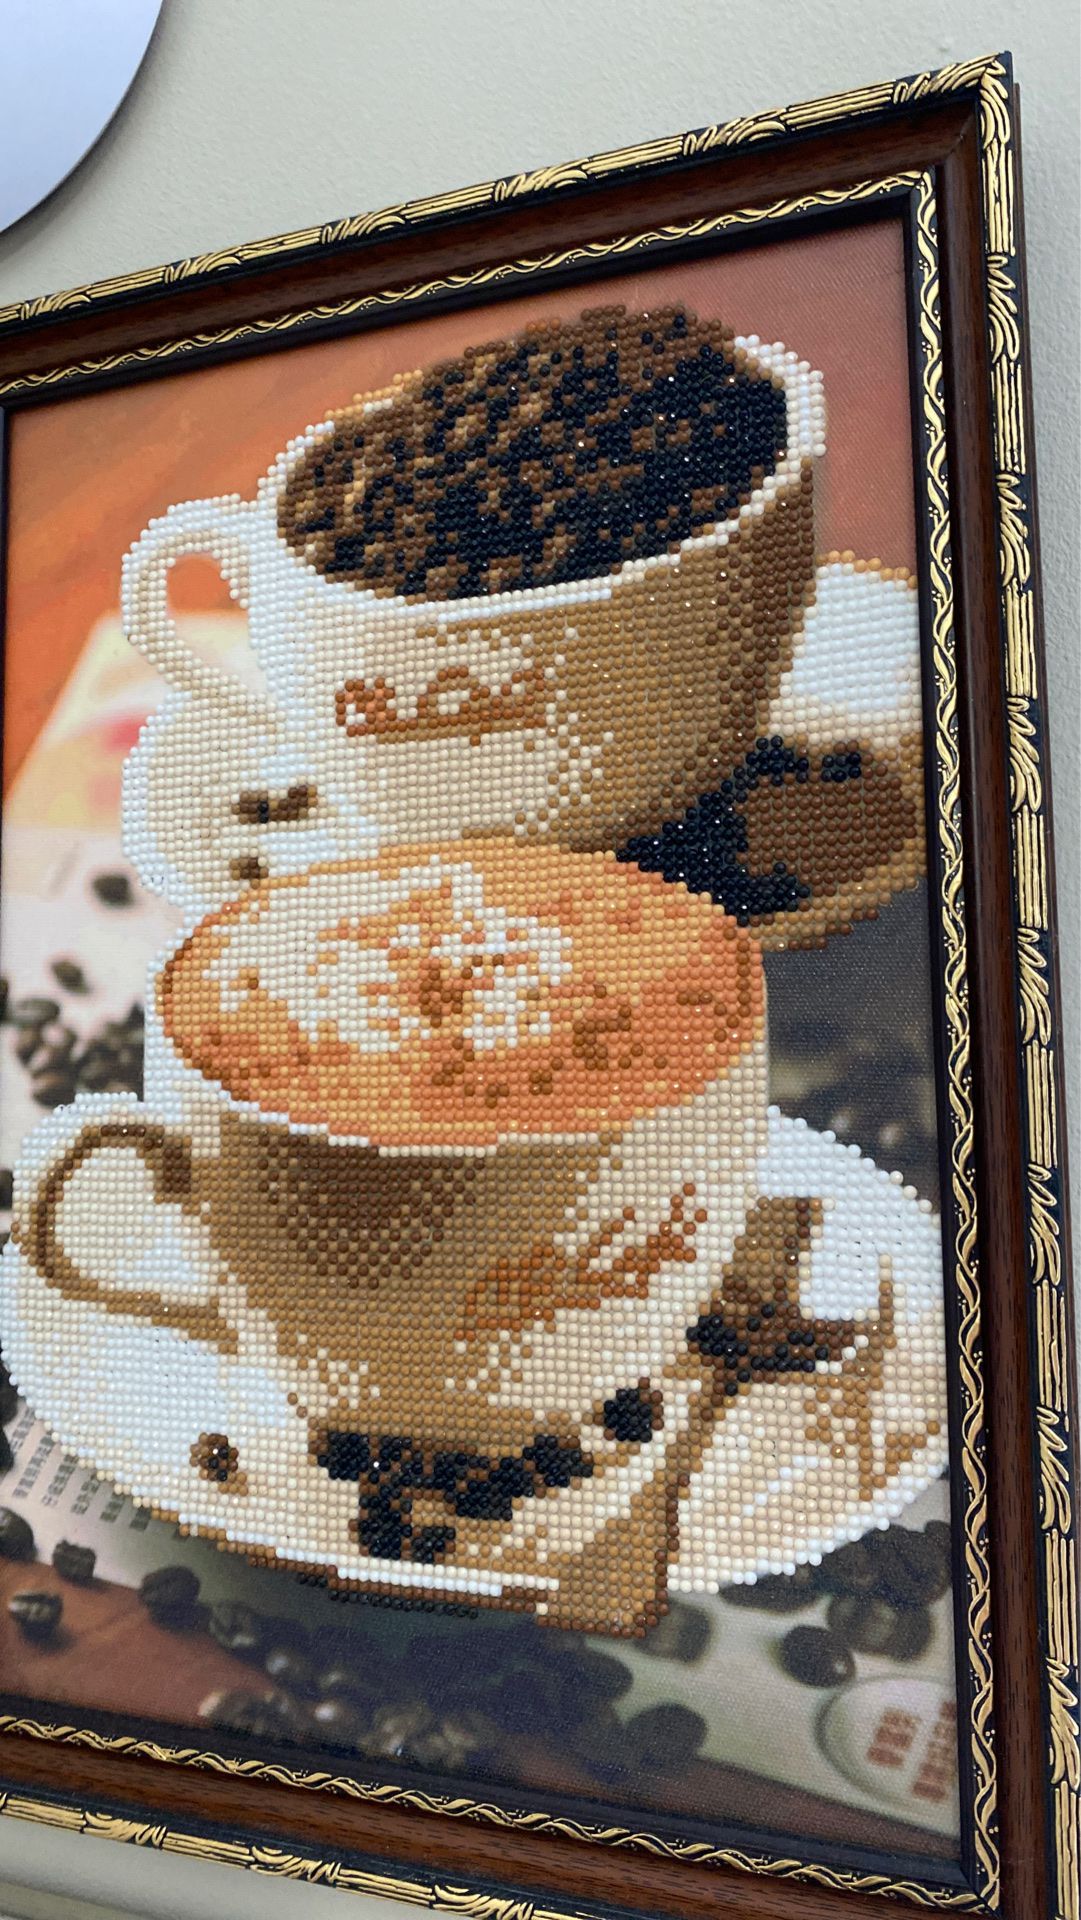 Art made out of beads, handmade